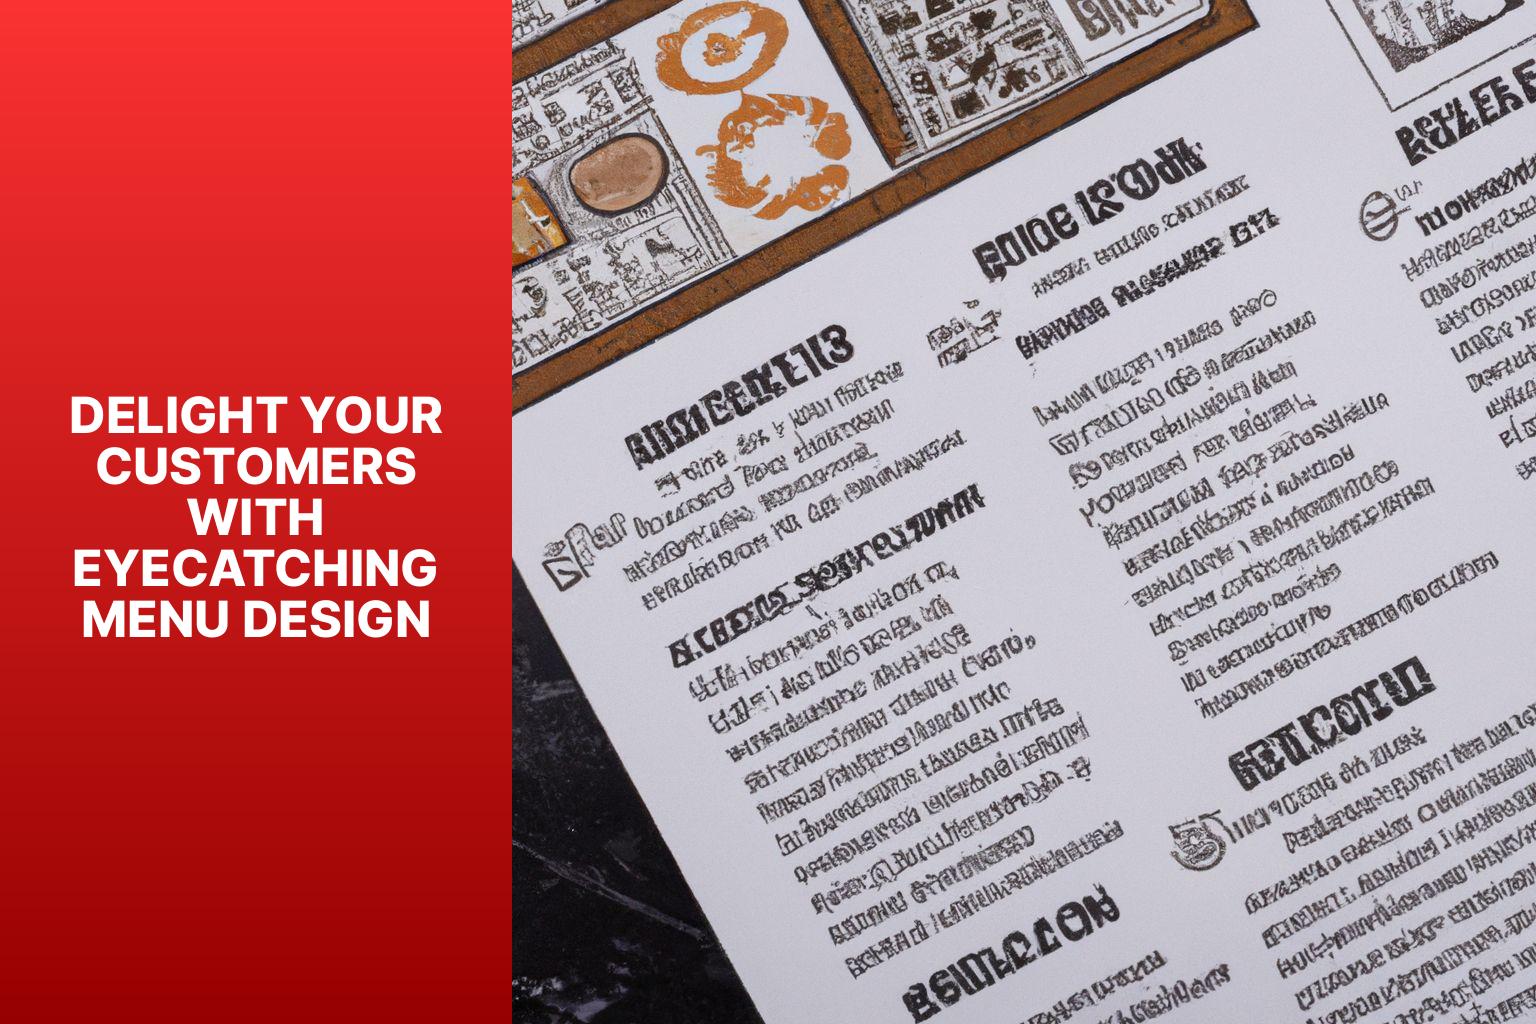 Delight Your Customers with EyeCatching Menu Design